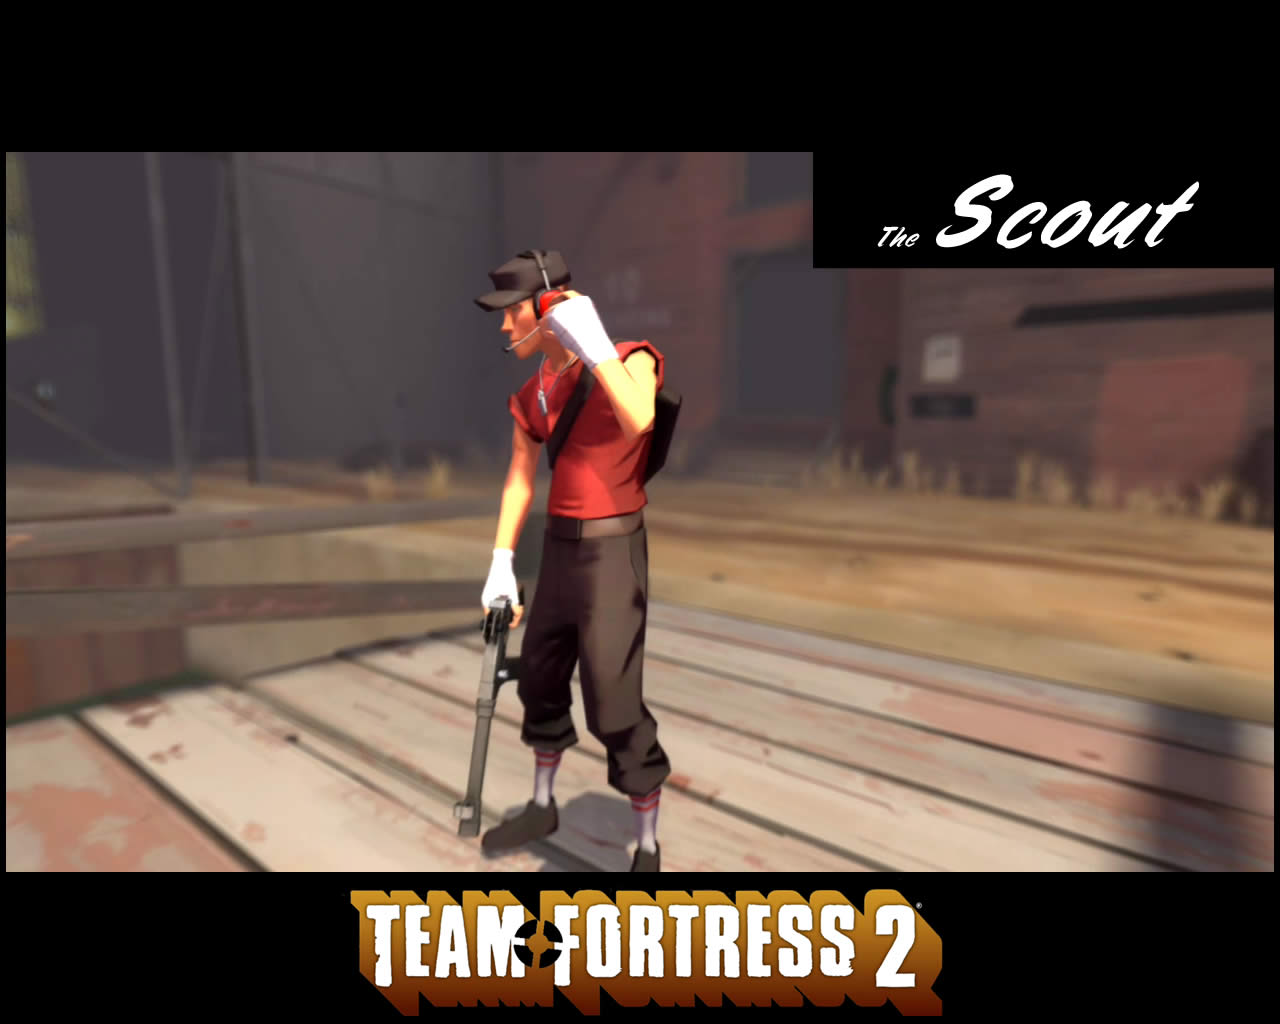 video game, scout (team fortress), team fortress 2